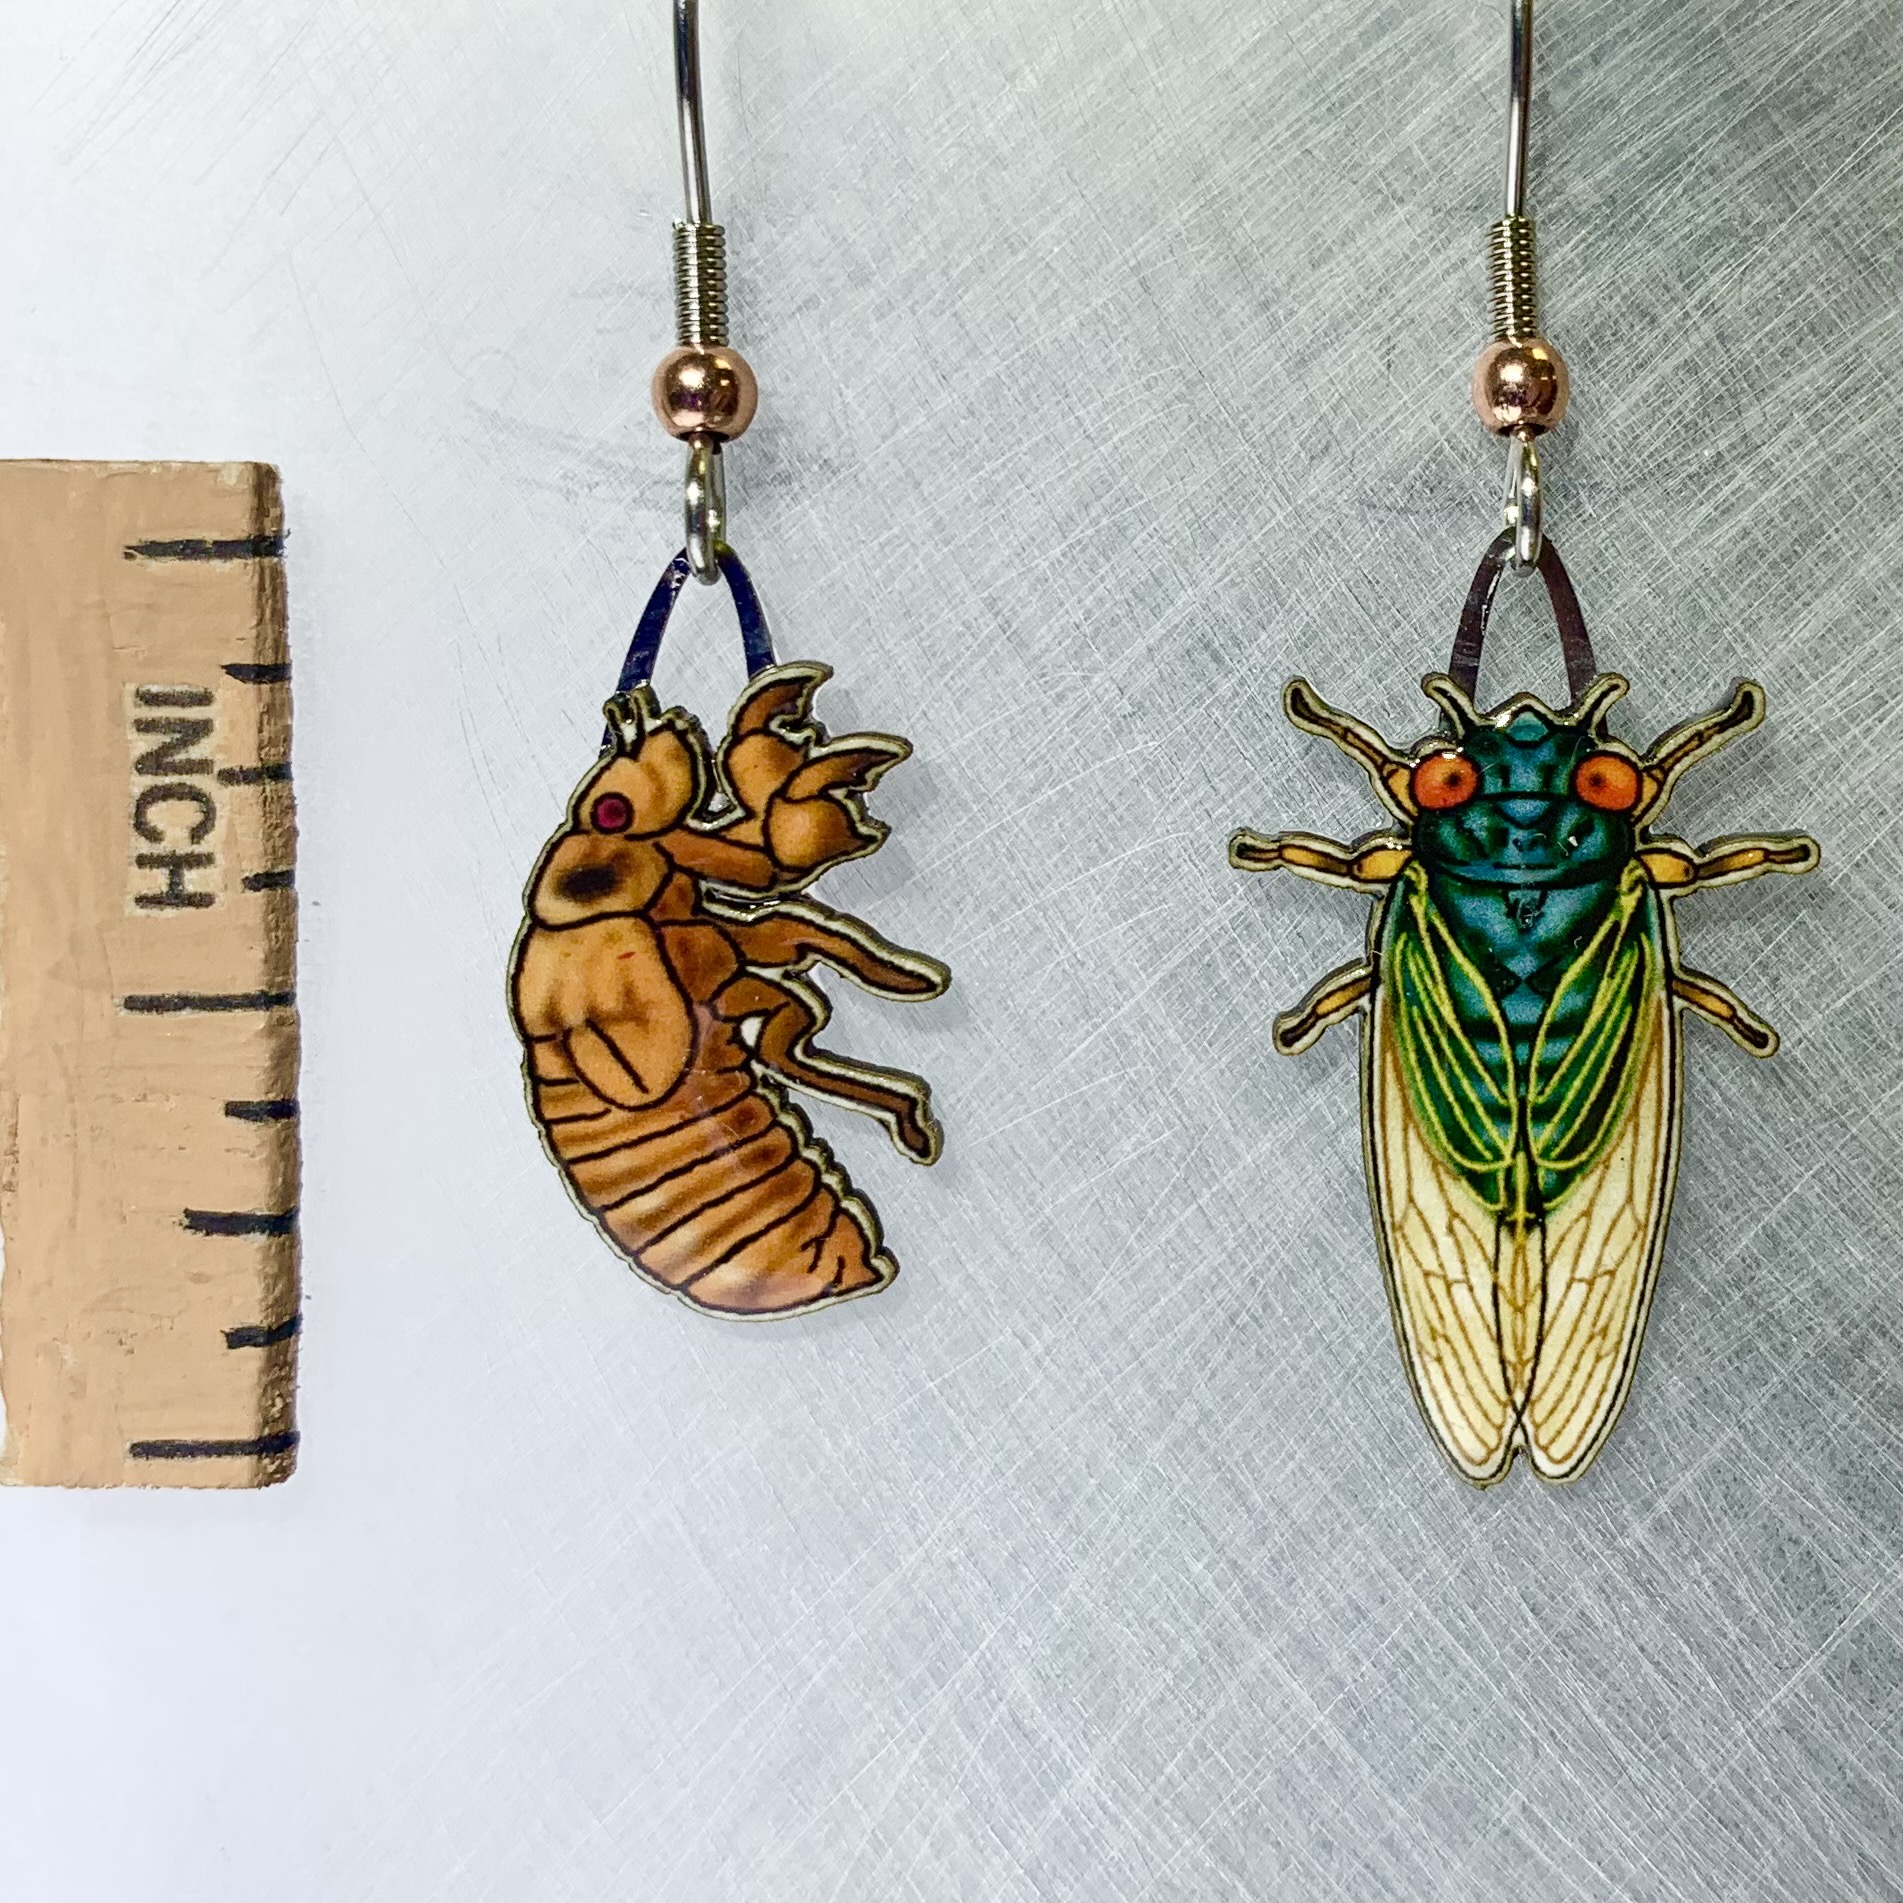 Picture shown is of 1 inch tall pair of earrings of the bug the Cicada.